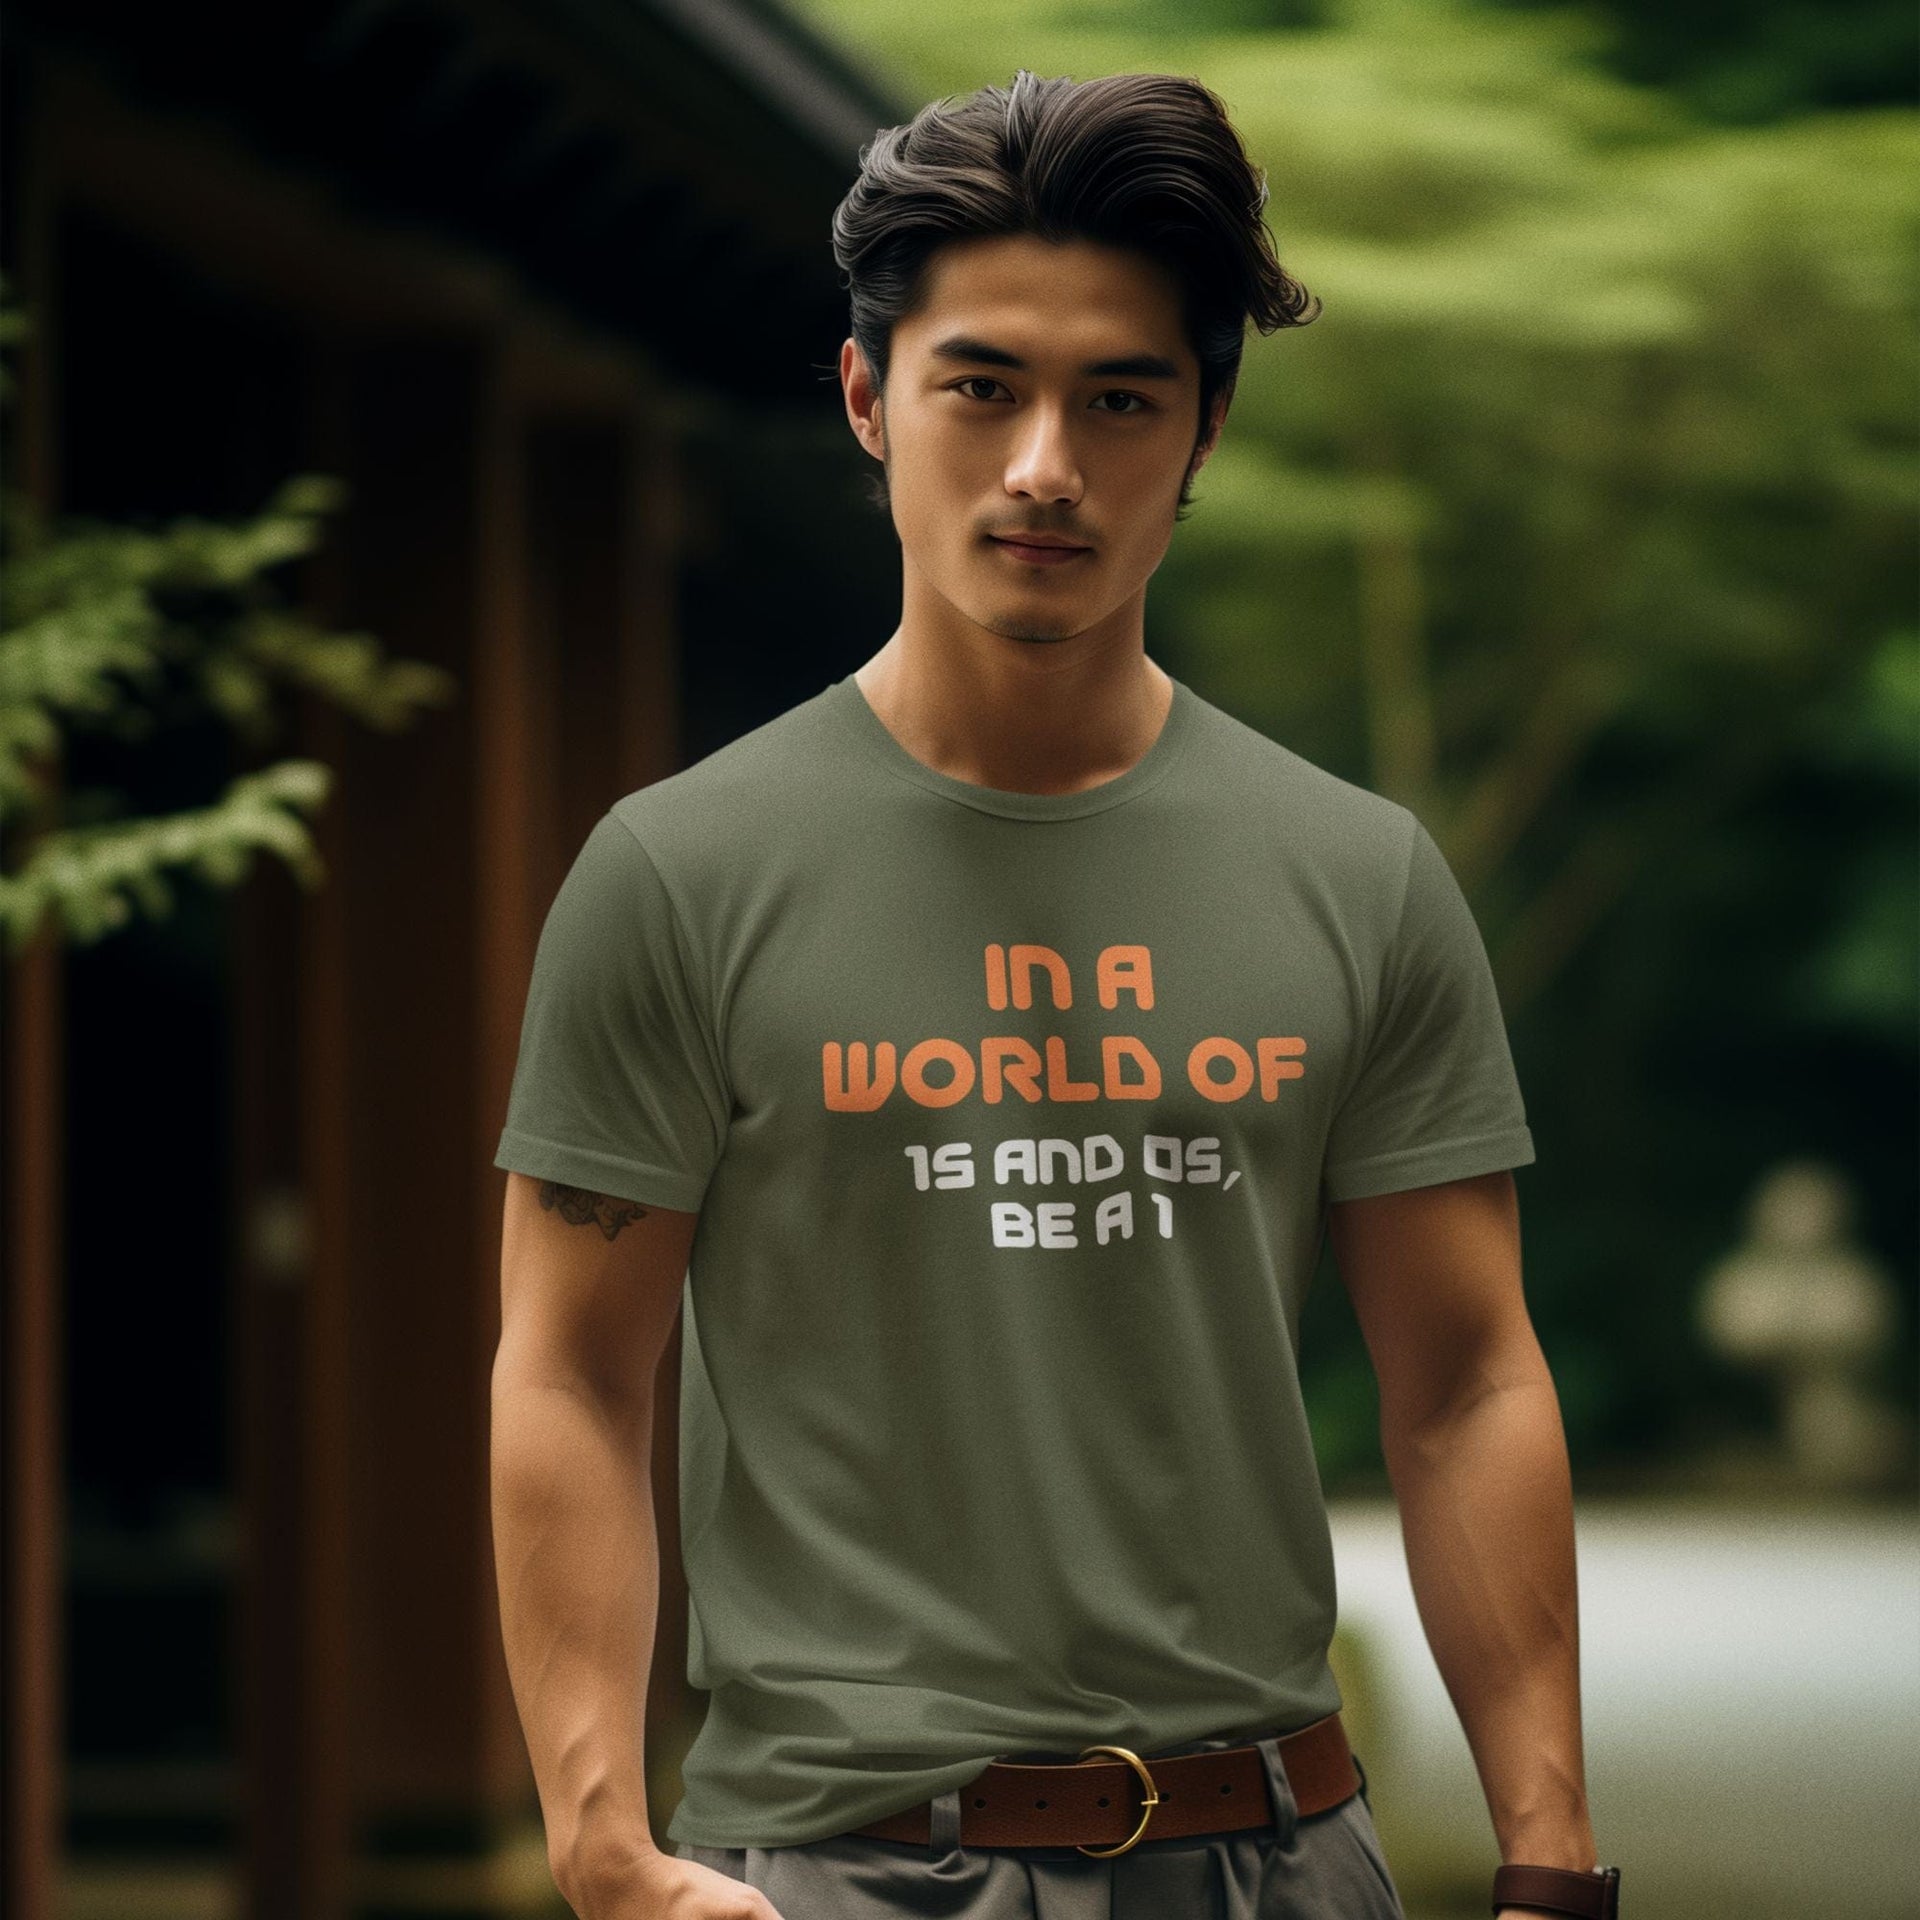 In a World of 1s and 0s, Be a 1 - Men's T-Shirt